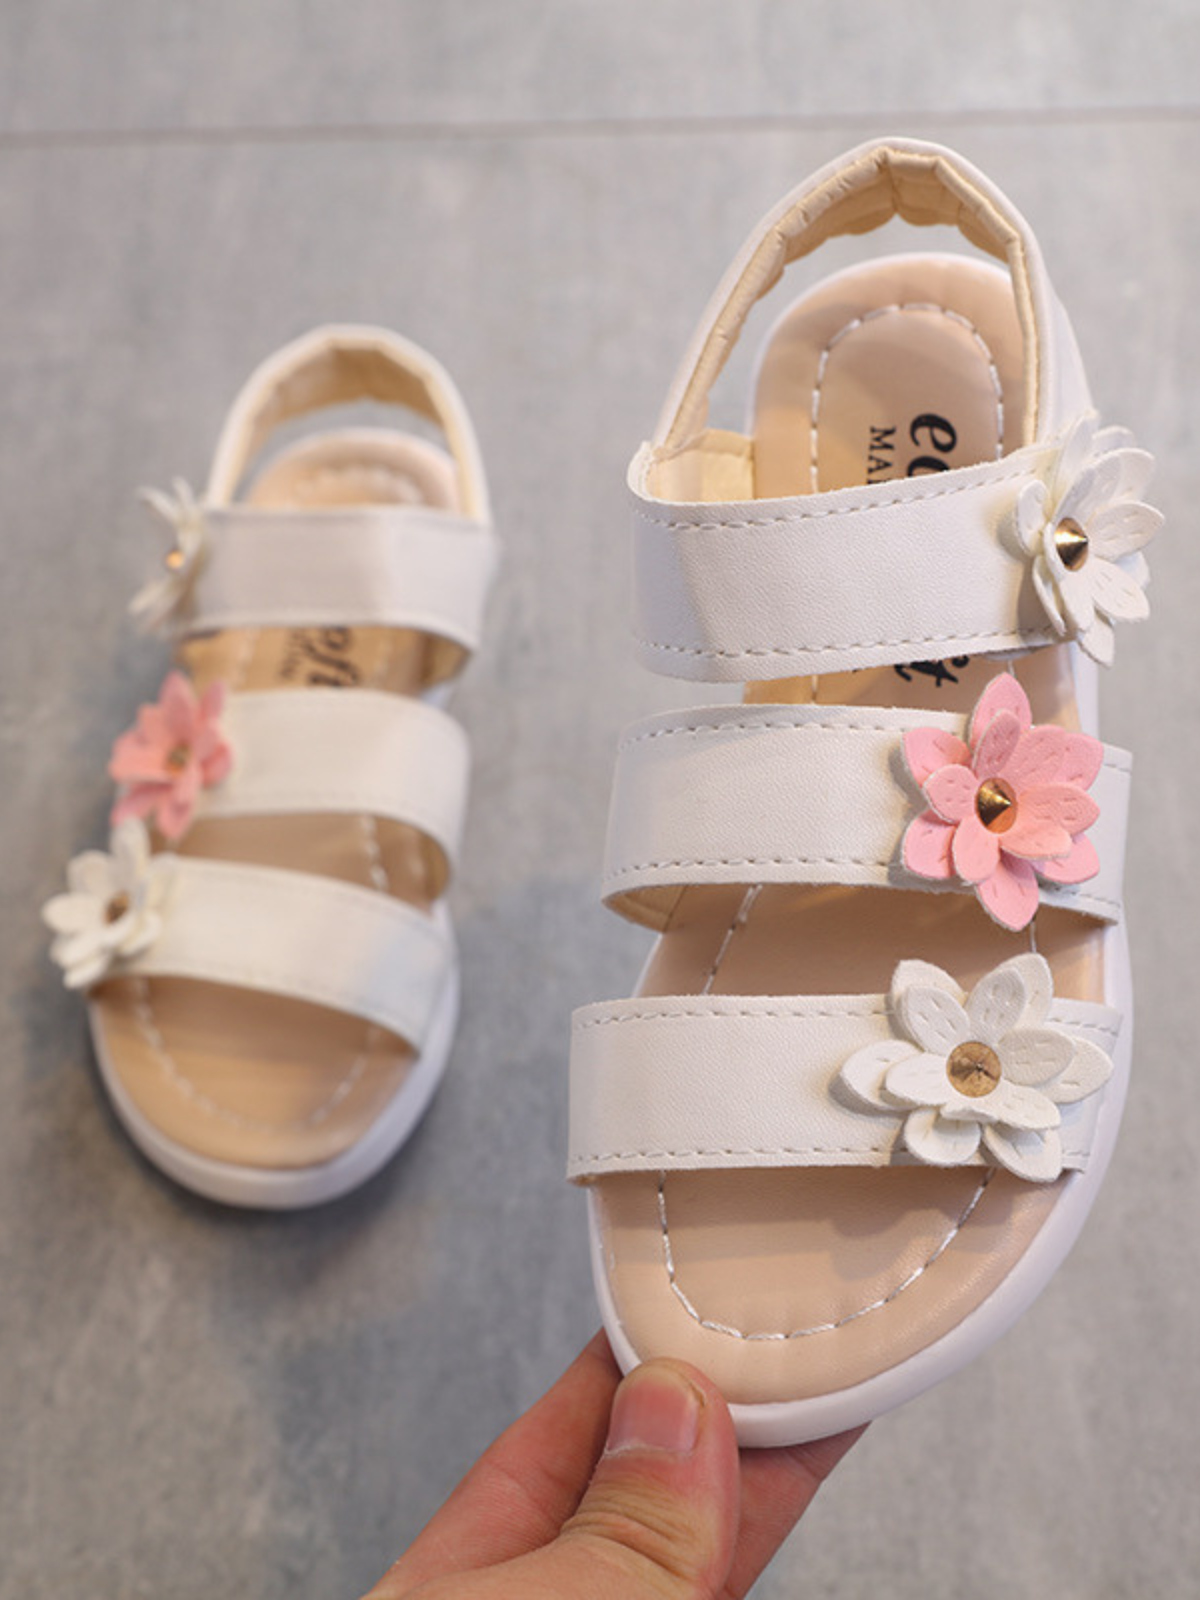 Toddler and Little Girls Shoes | Cute Flower Sandals | Mia Belle Girls